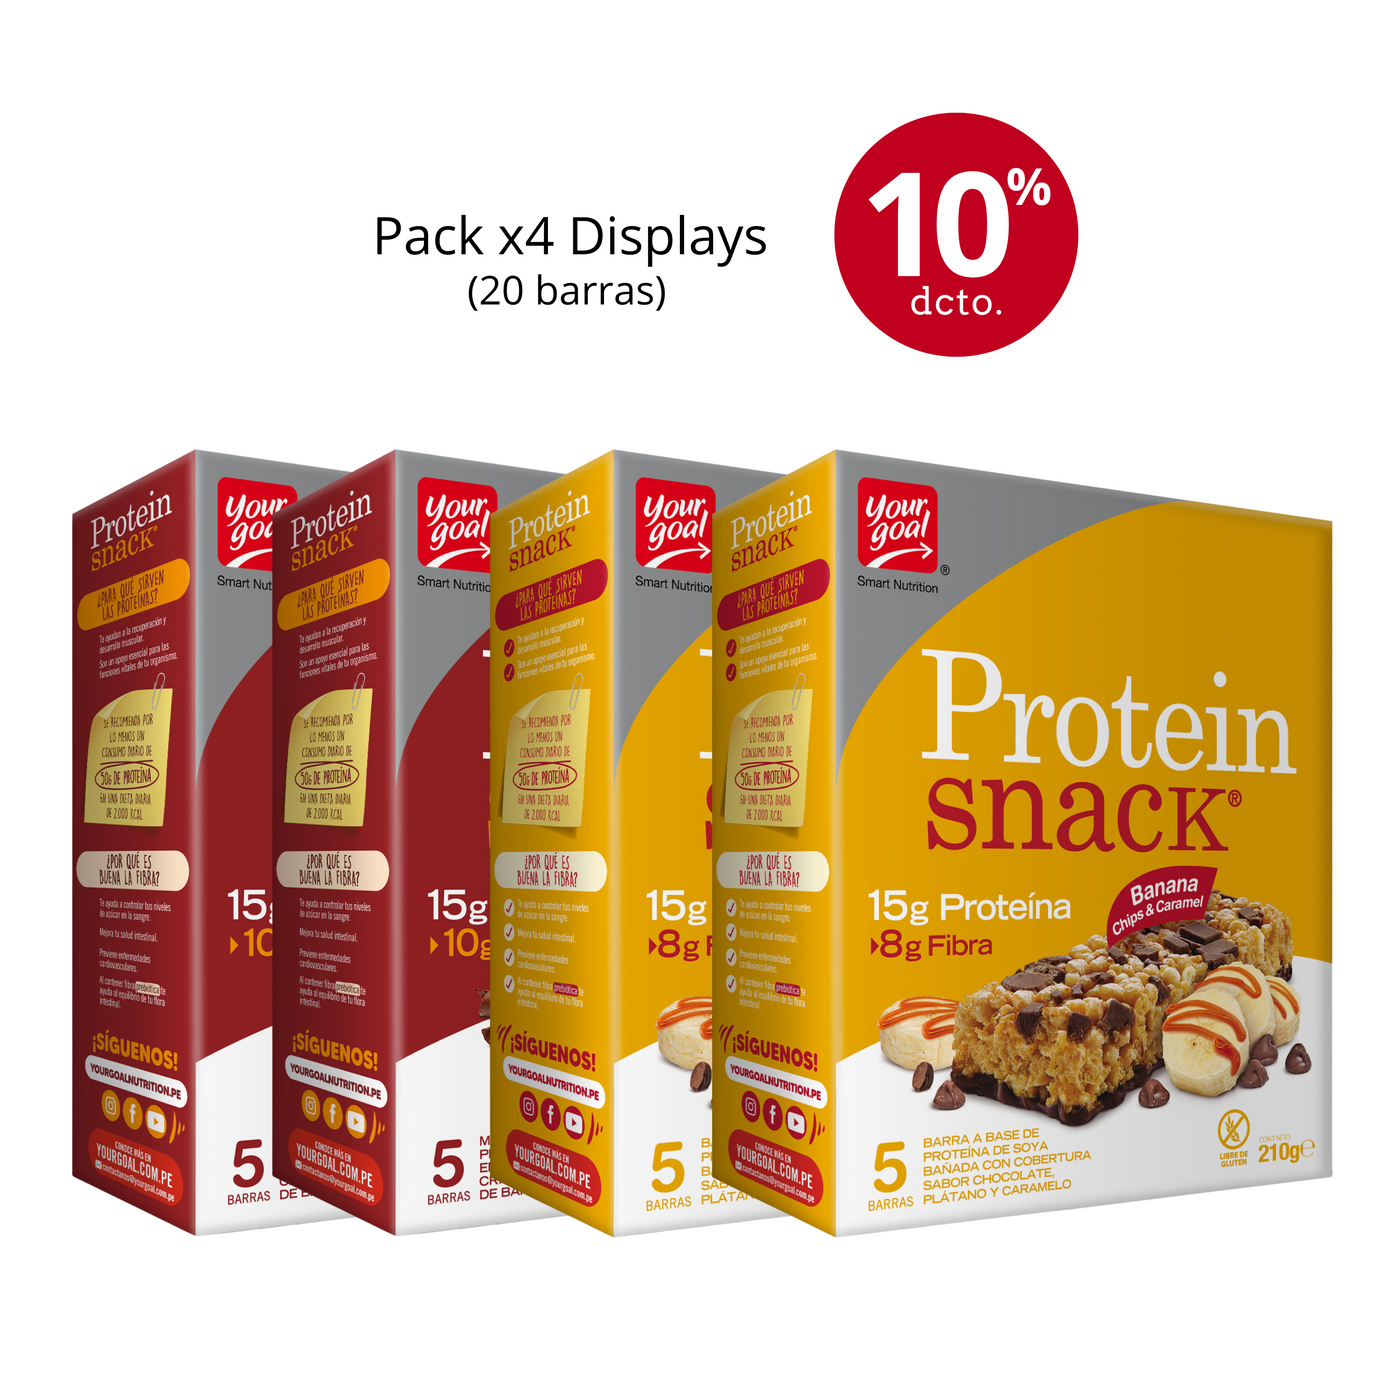 PACK X4 DISPLAYS PROTEIN SNACK (20 BARRAS)